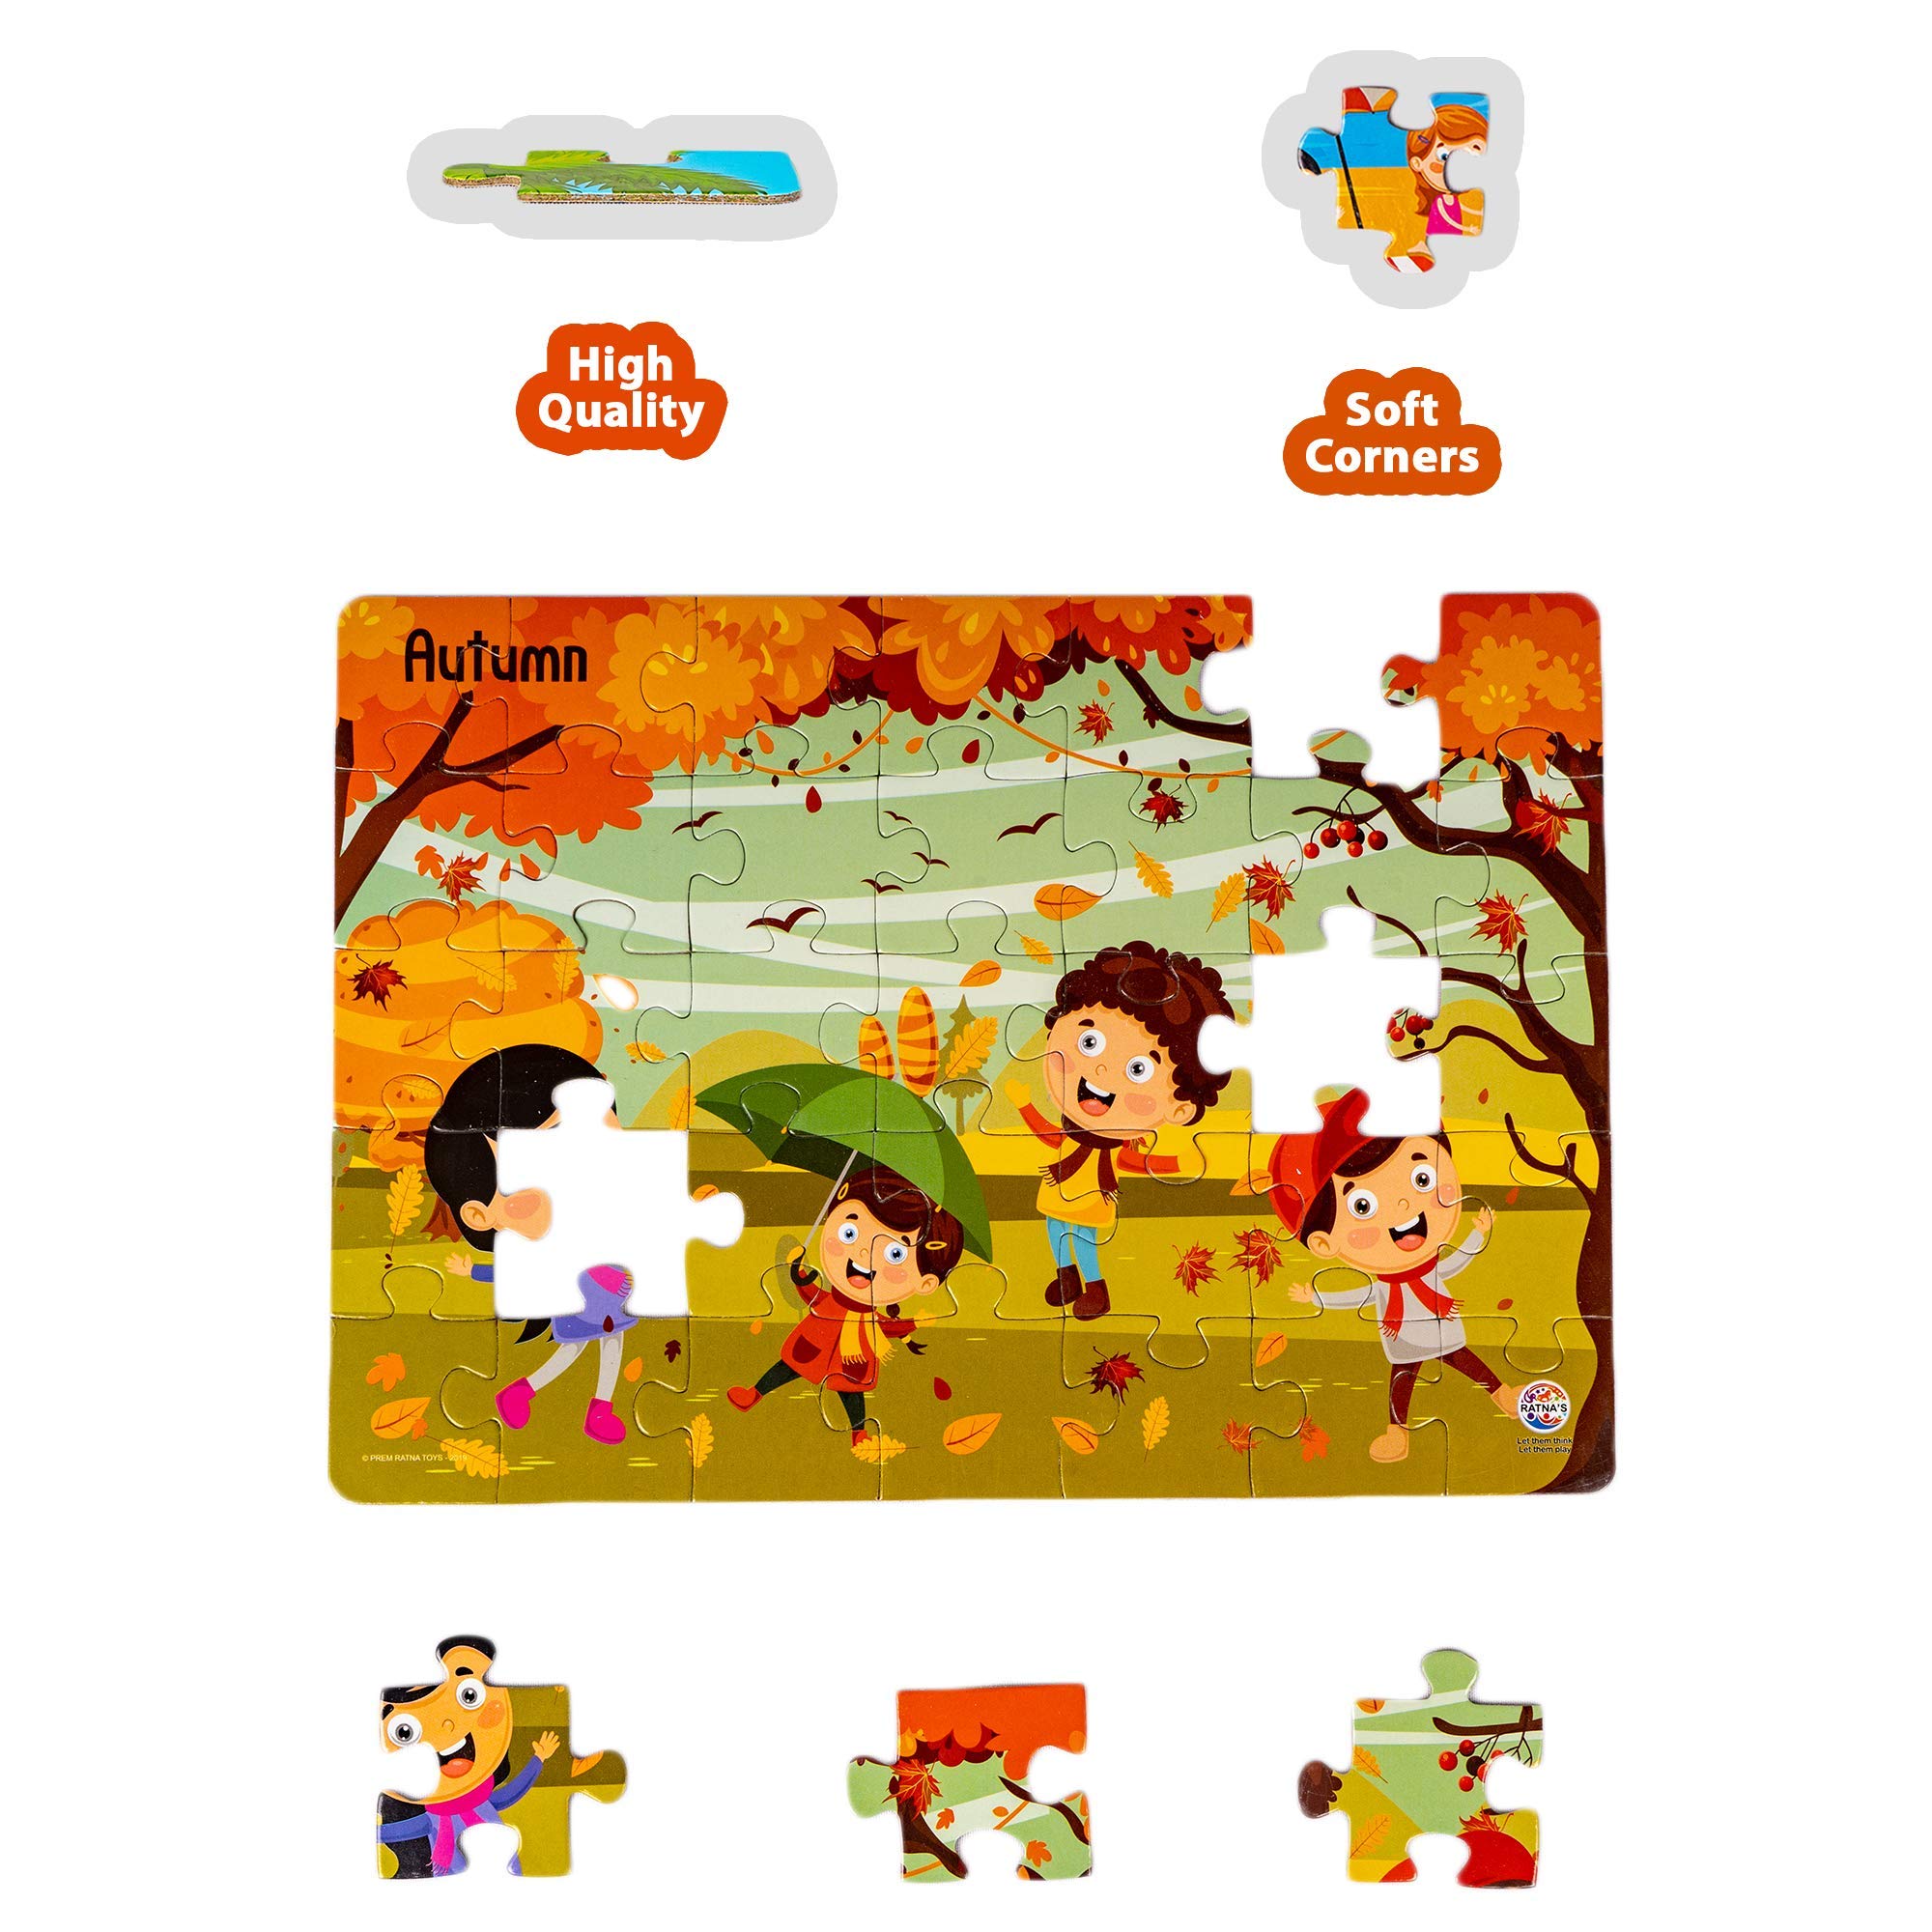 Ratna's 4 in 1 Indian Seasons Jigsaw Puzzle for Kids - Set of 4 | 35-Piece Puzzles | Educational Toy for Cognitive Development | Vibrant Colors | Puzzle Guide Included | Ages 3 and Up